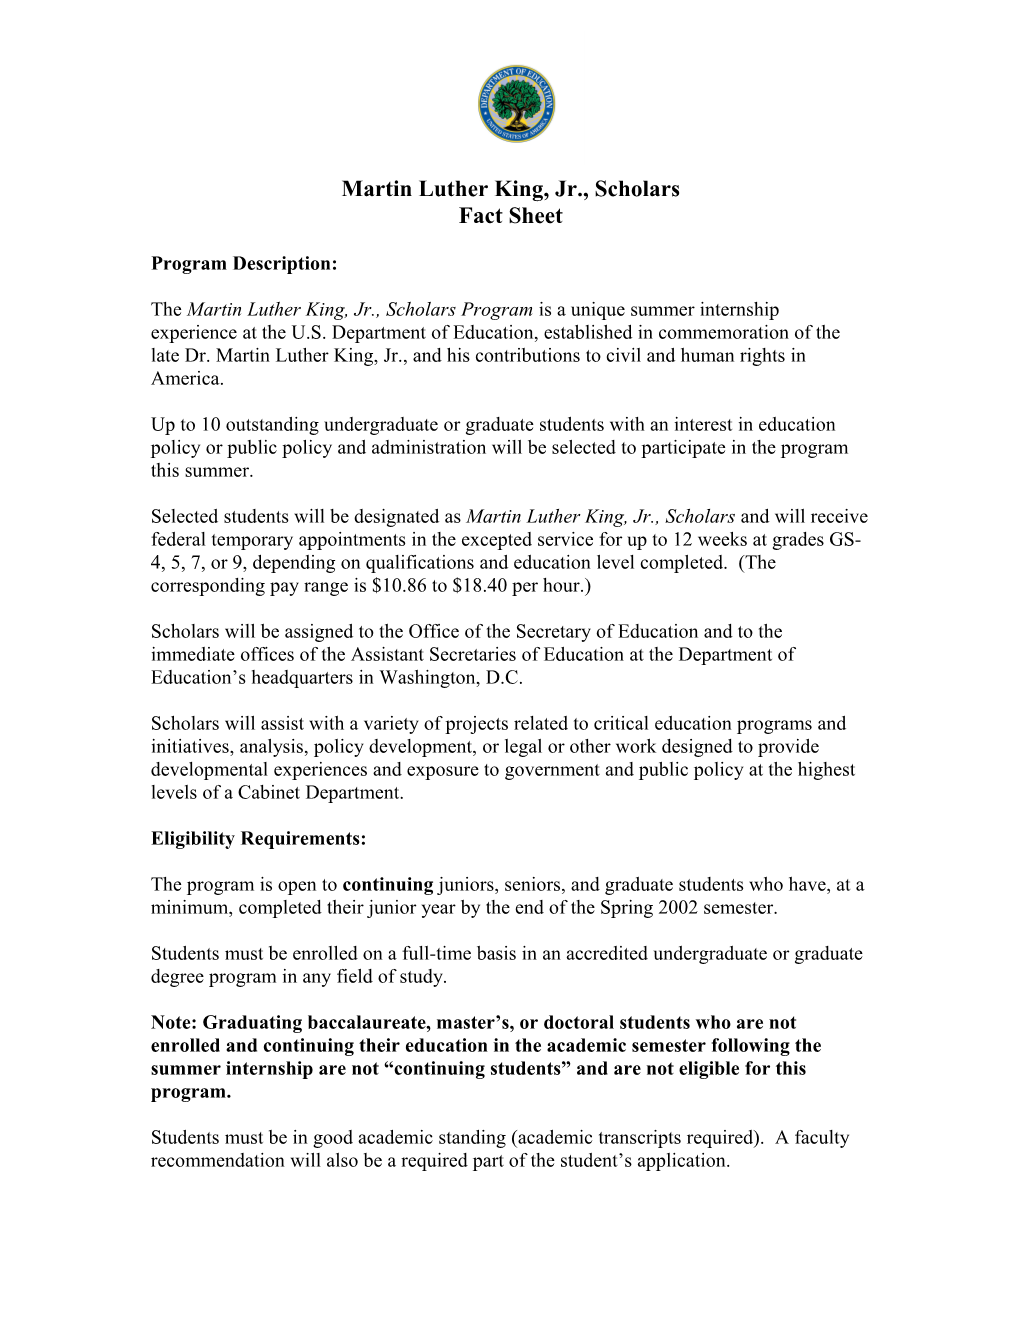 Martin Luther King Scholars